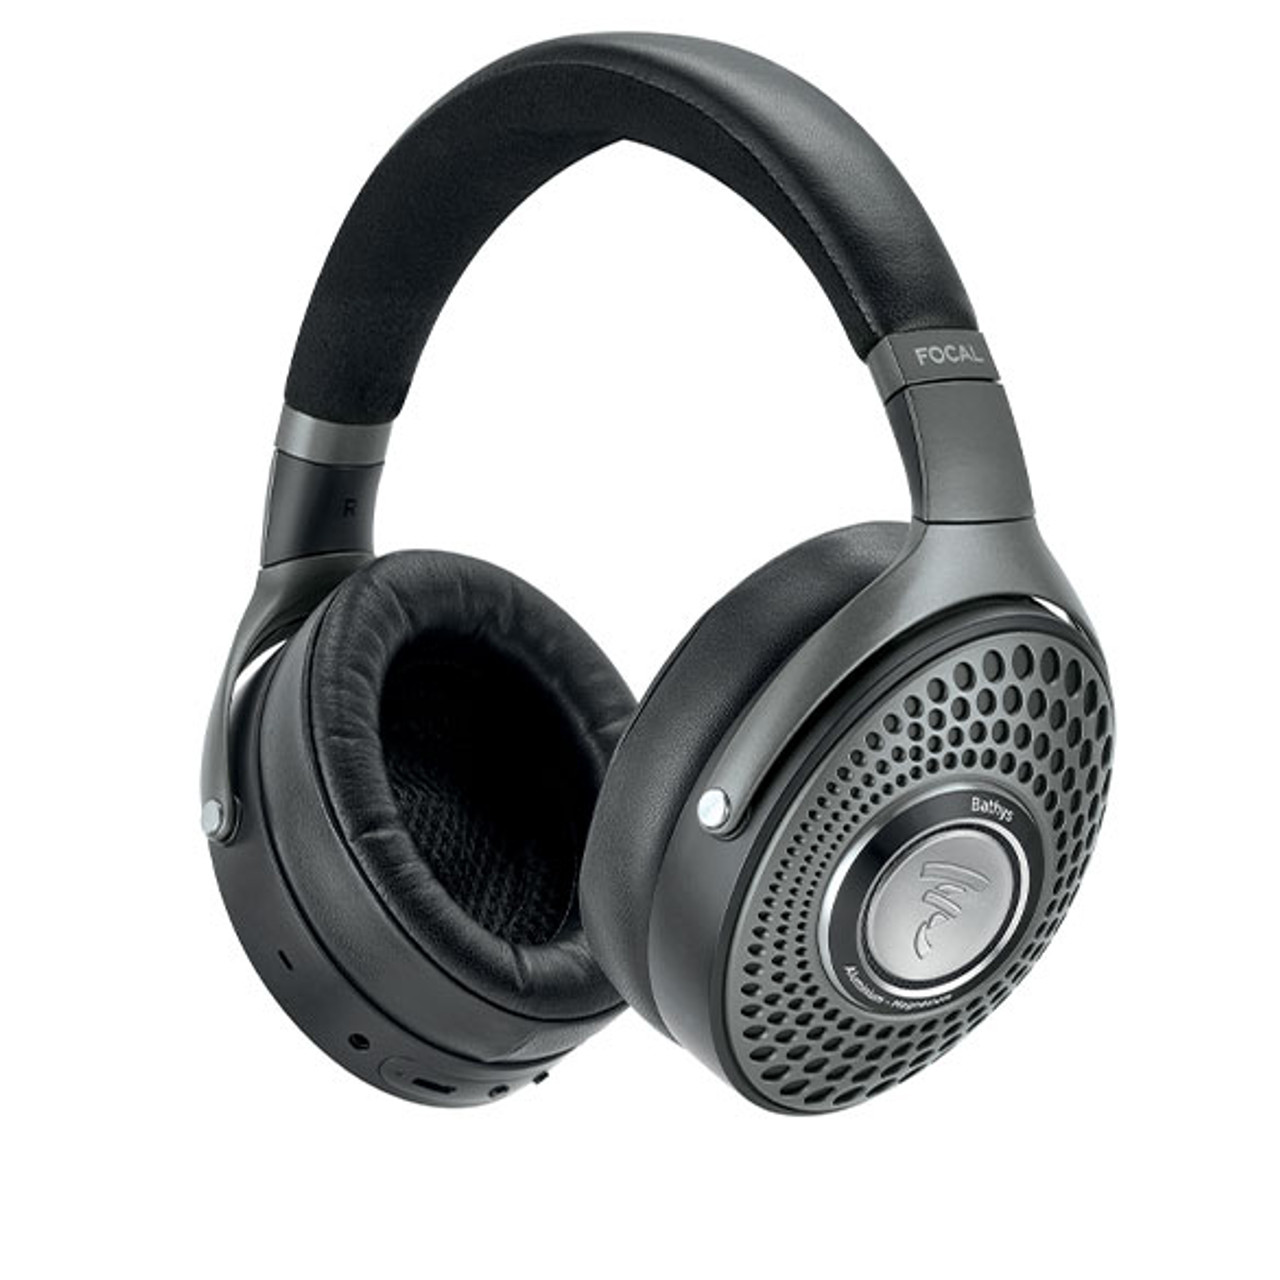 Frequently asked questions - Headphones Bathys